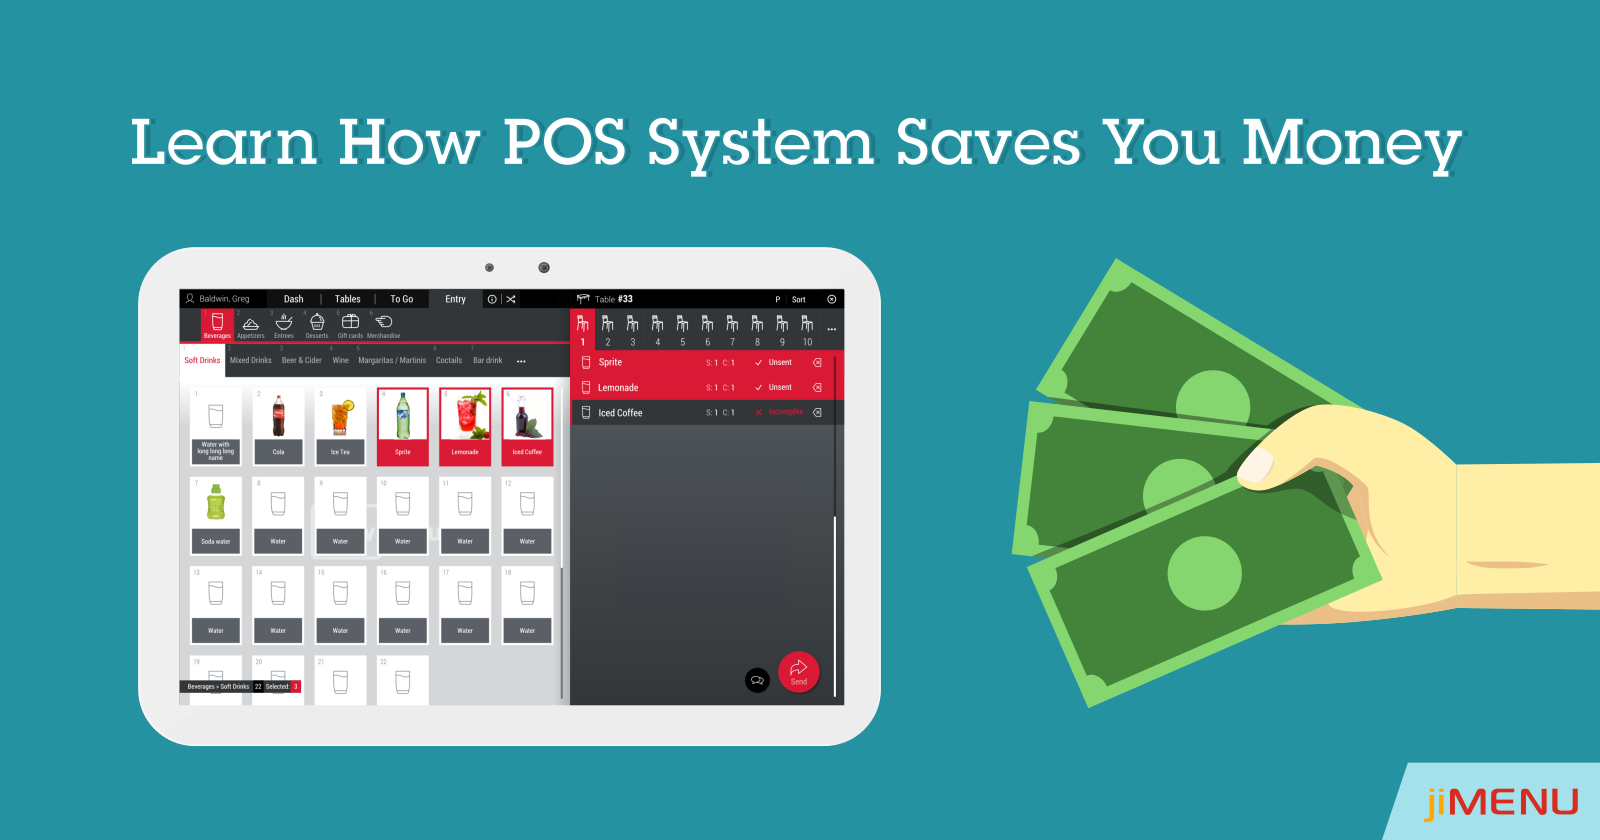 How Restaurant POS System is Saving You Money